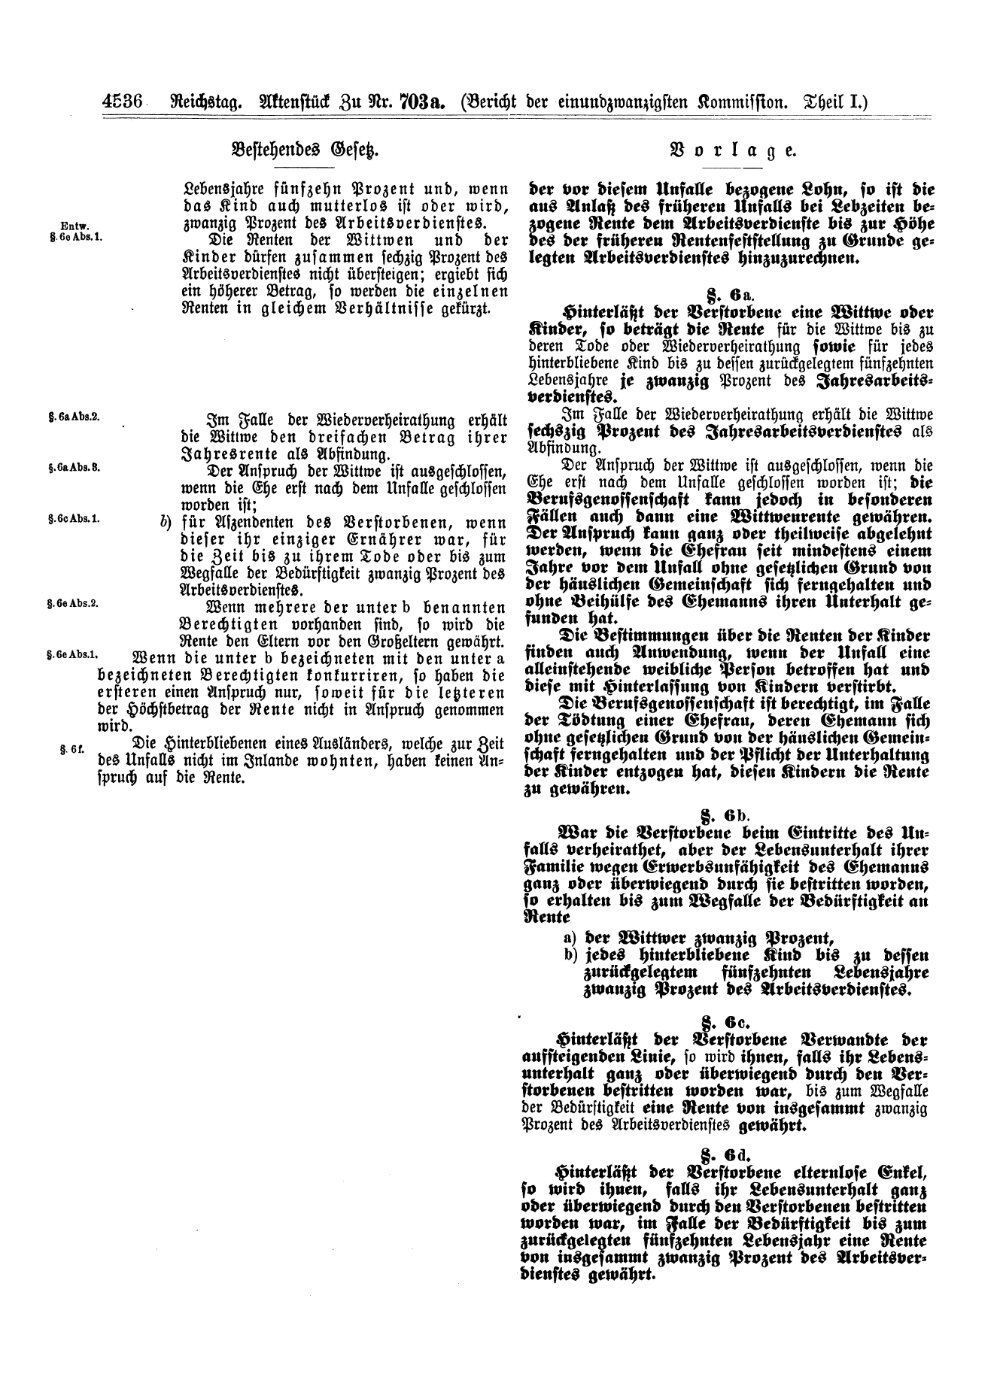 Scan of page 4536